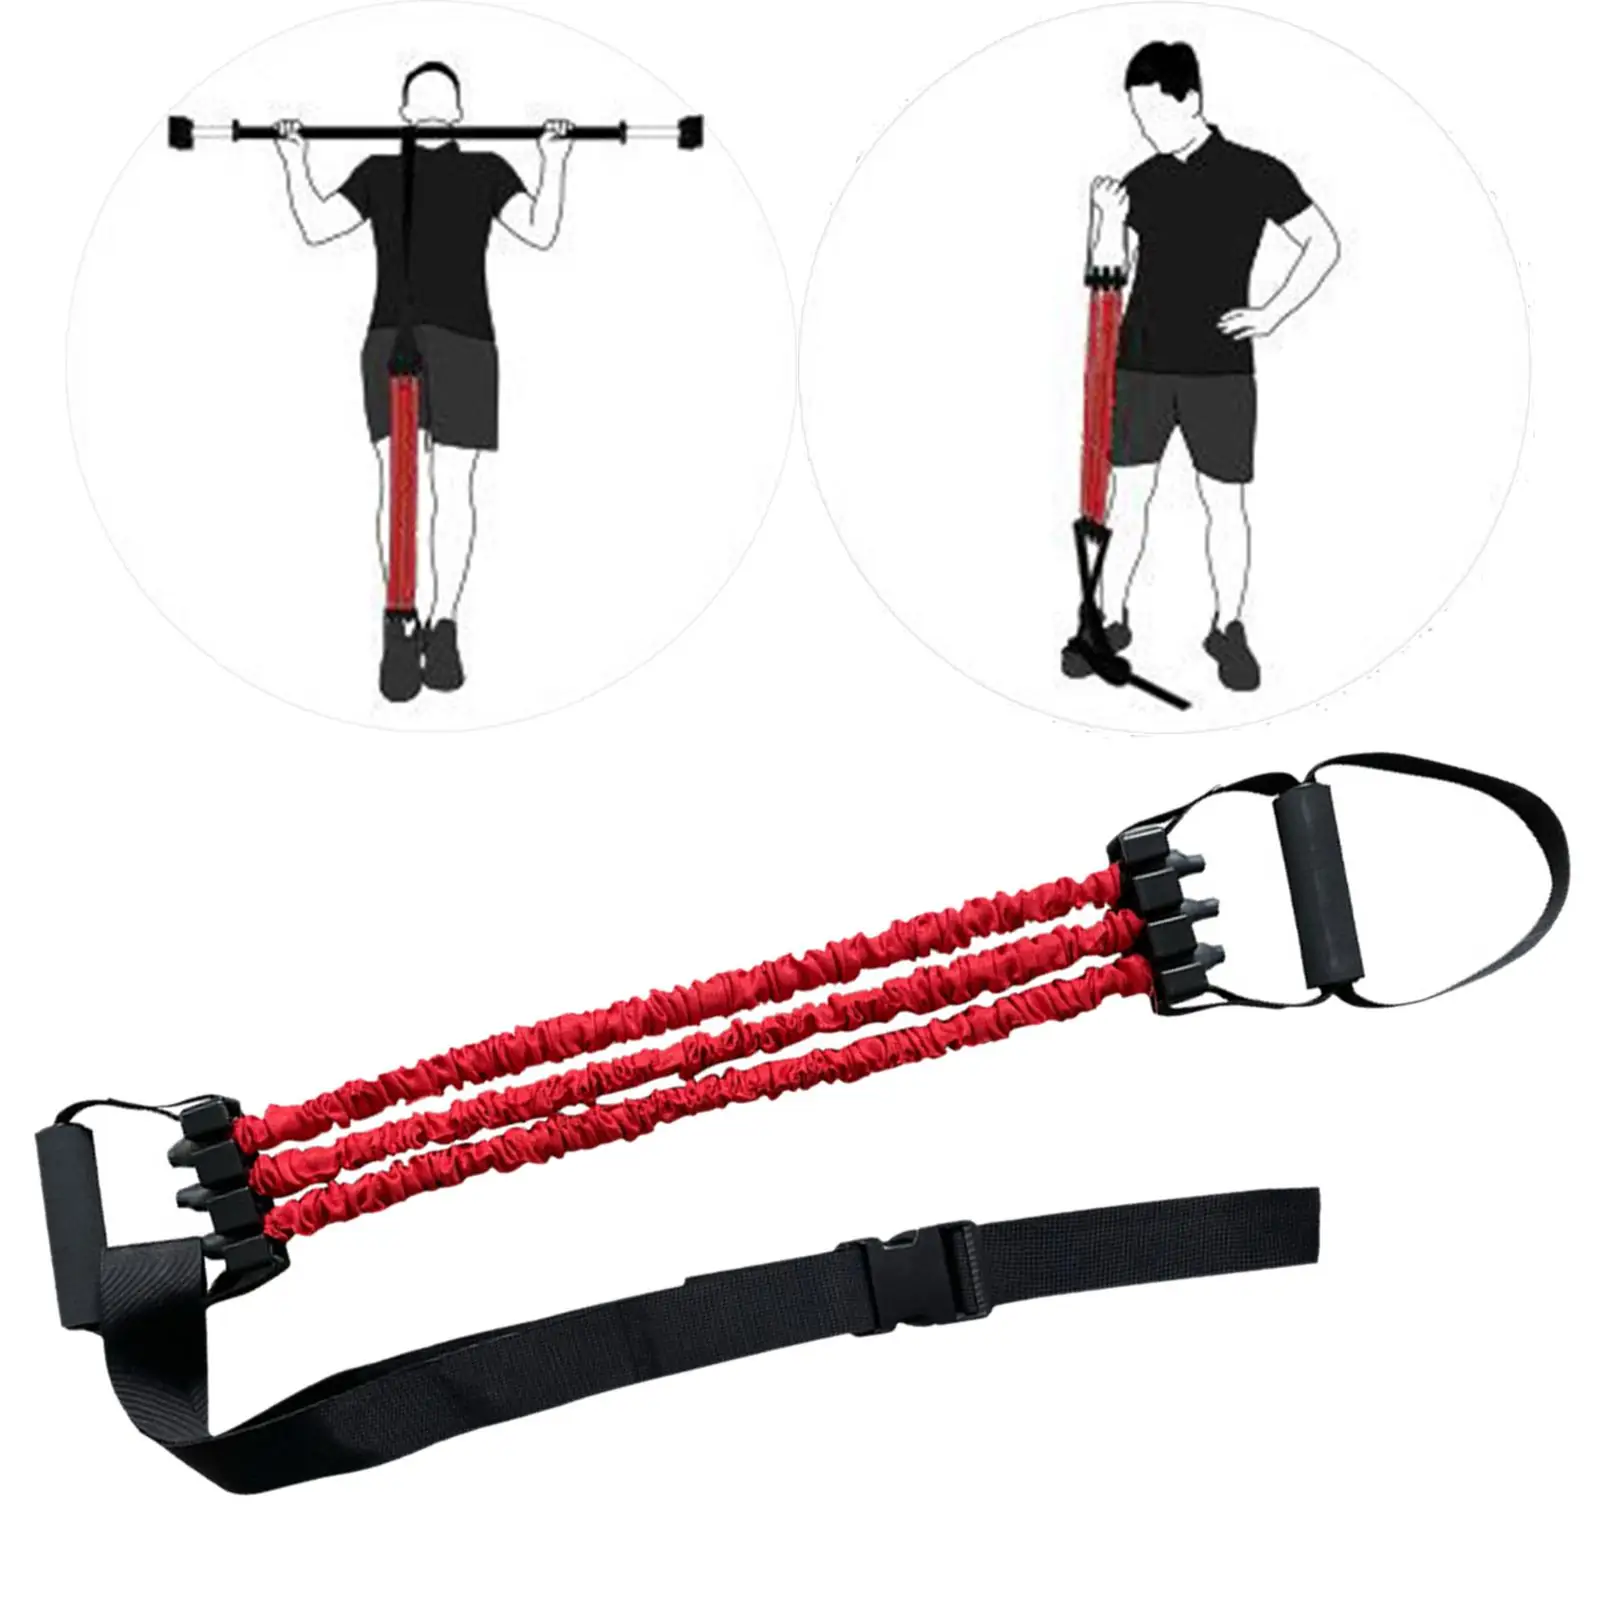 Heavy Duty Chin up Assist Bands Resistance Bands for Improve Arm Strength